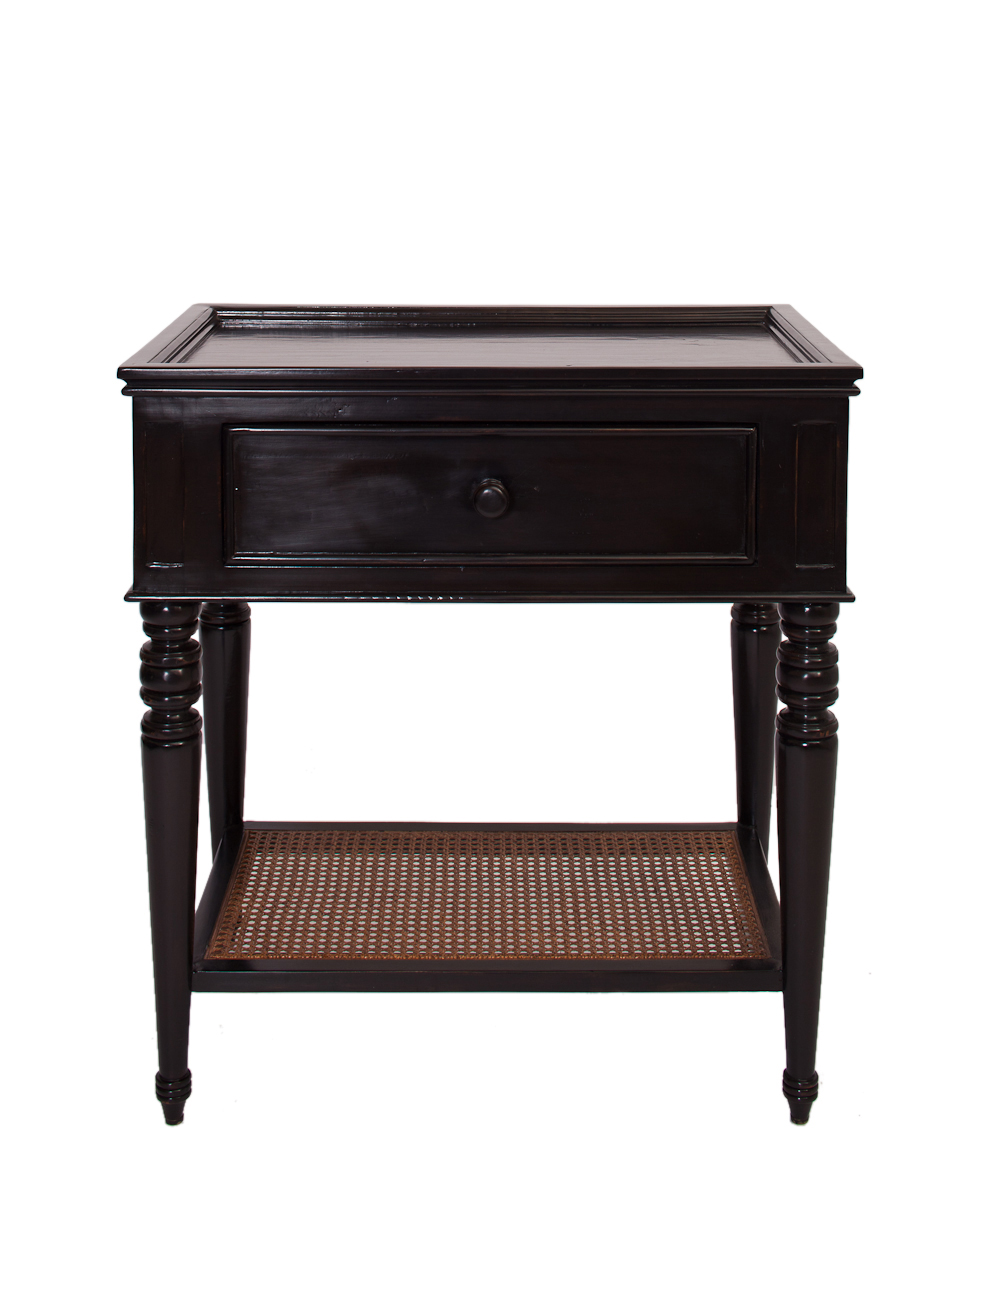 dressers nightstands tables rooms gardens nightstand cane shelf ebony distressed round black pedestal accent table custom kensington reclaimed wood furniture glass top coffee with